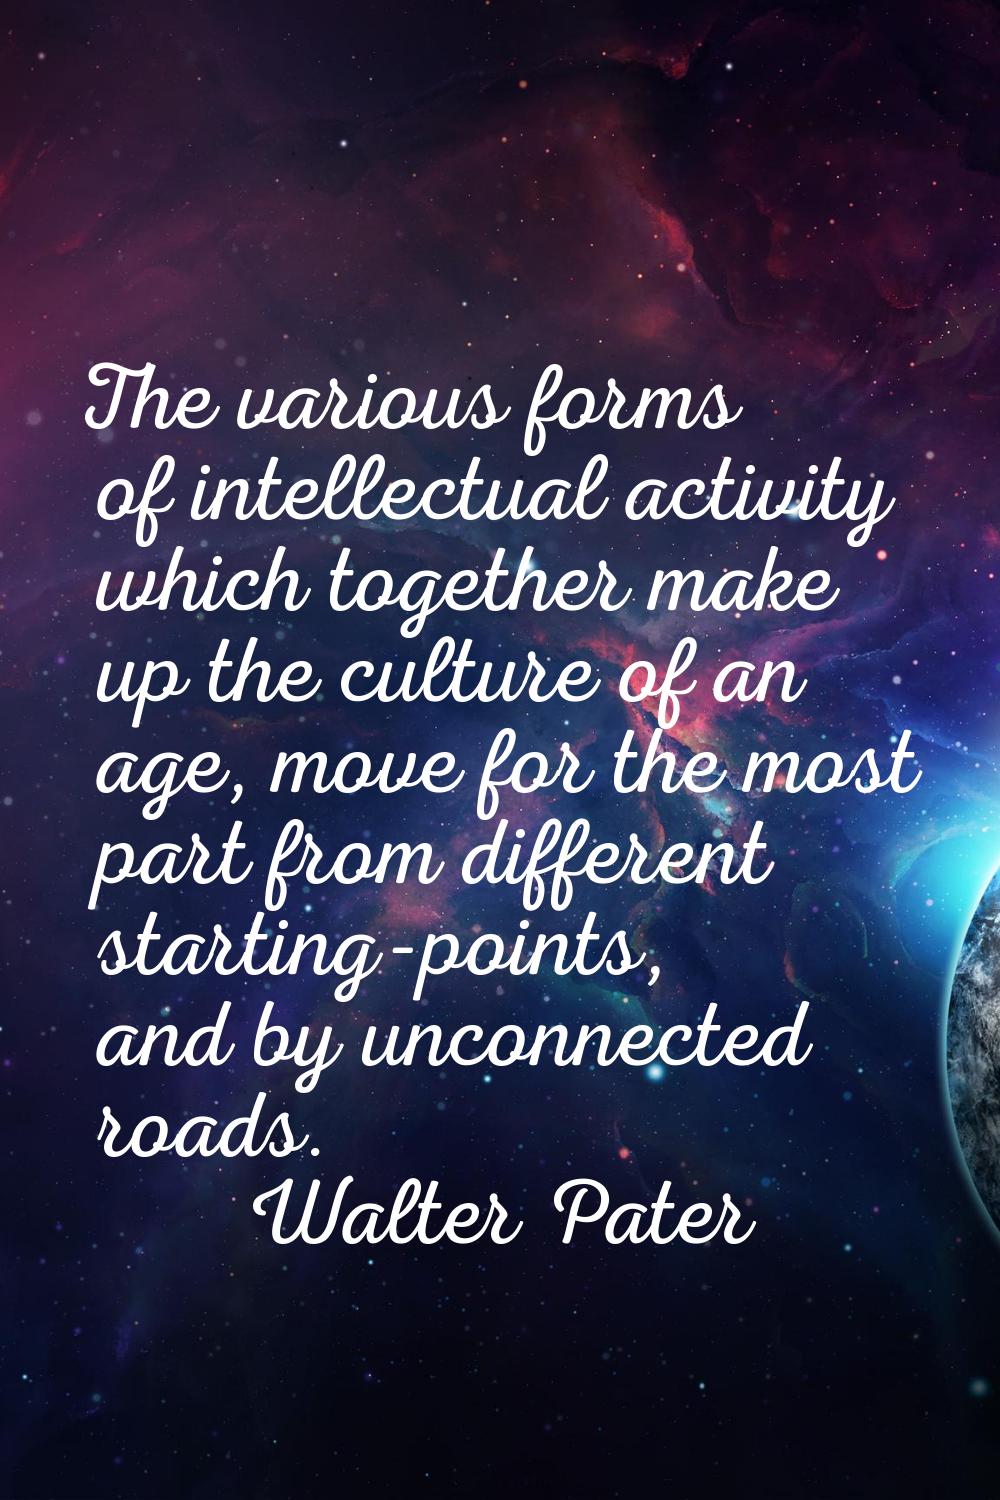 The various forms of intellectual activity which together make up the culture of an age, move for t